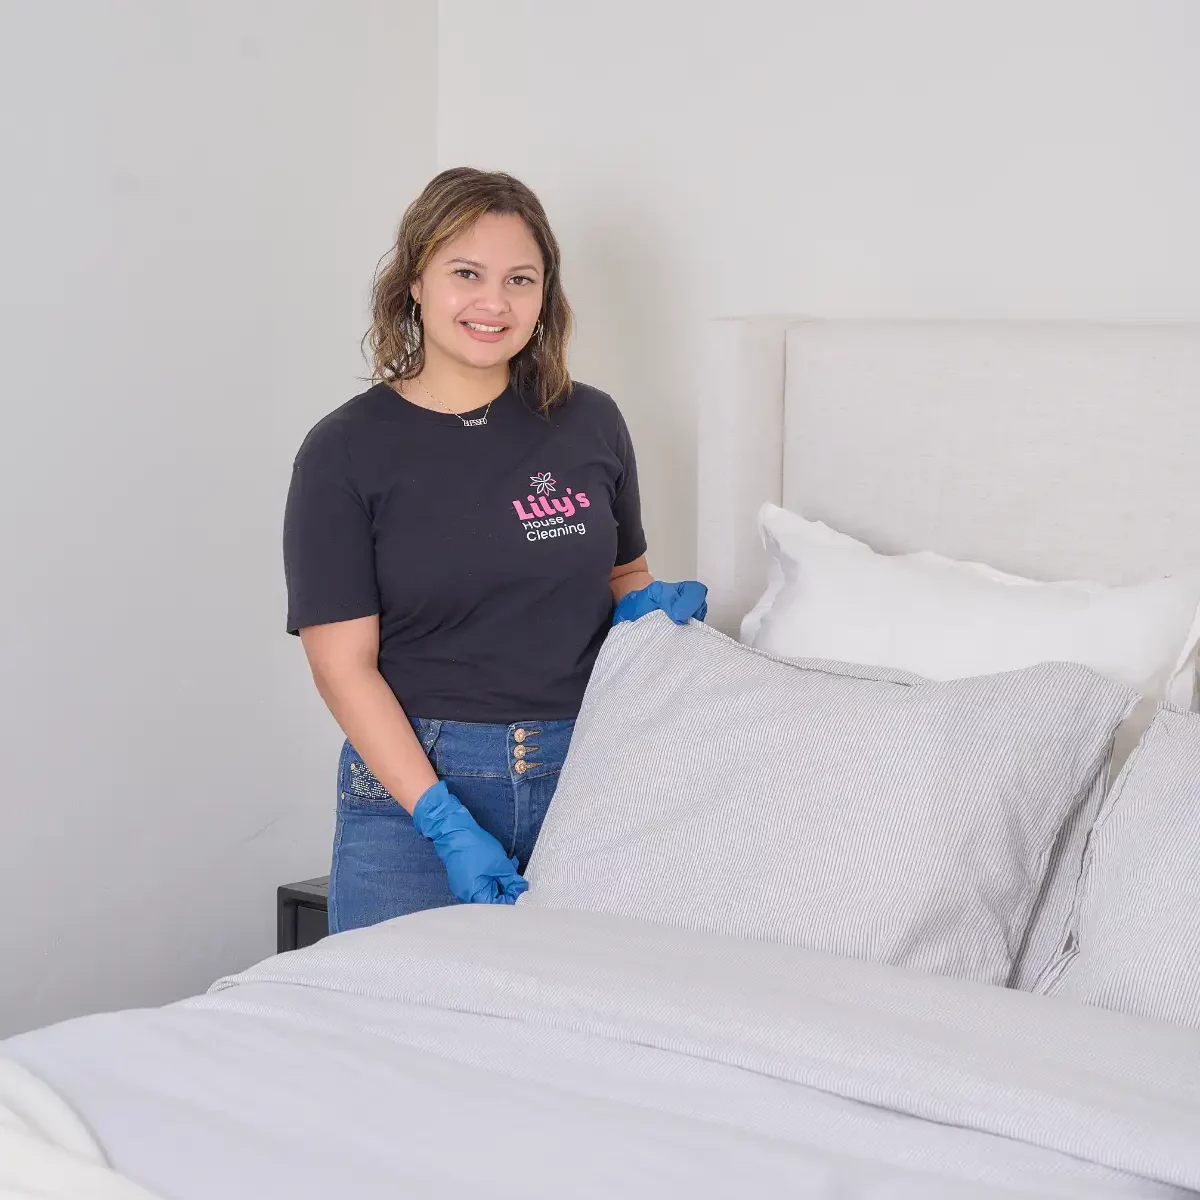 Lily's House Cleaner making the bed